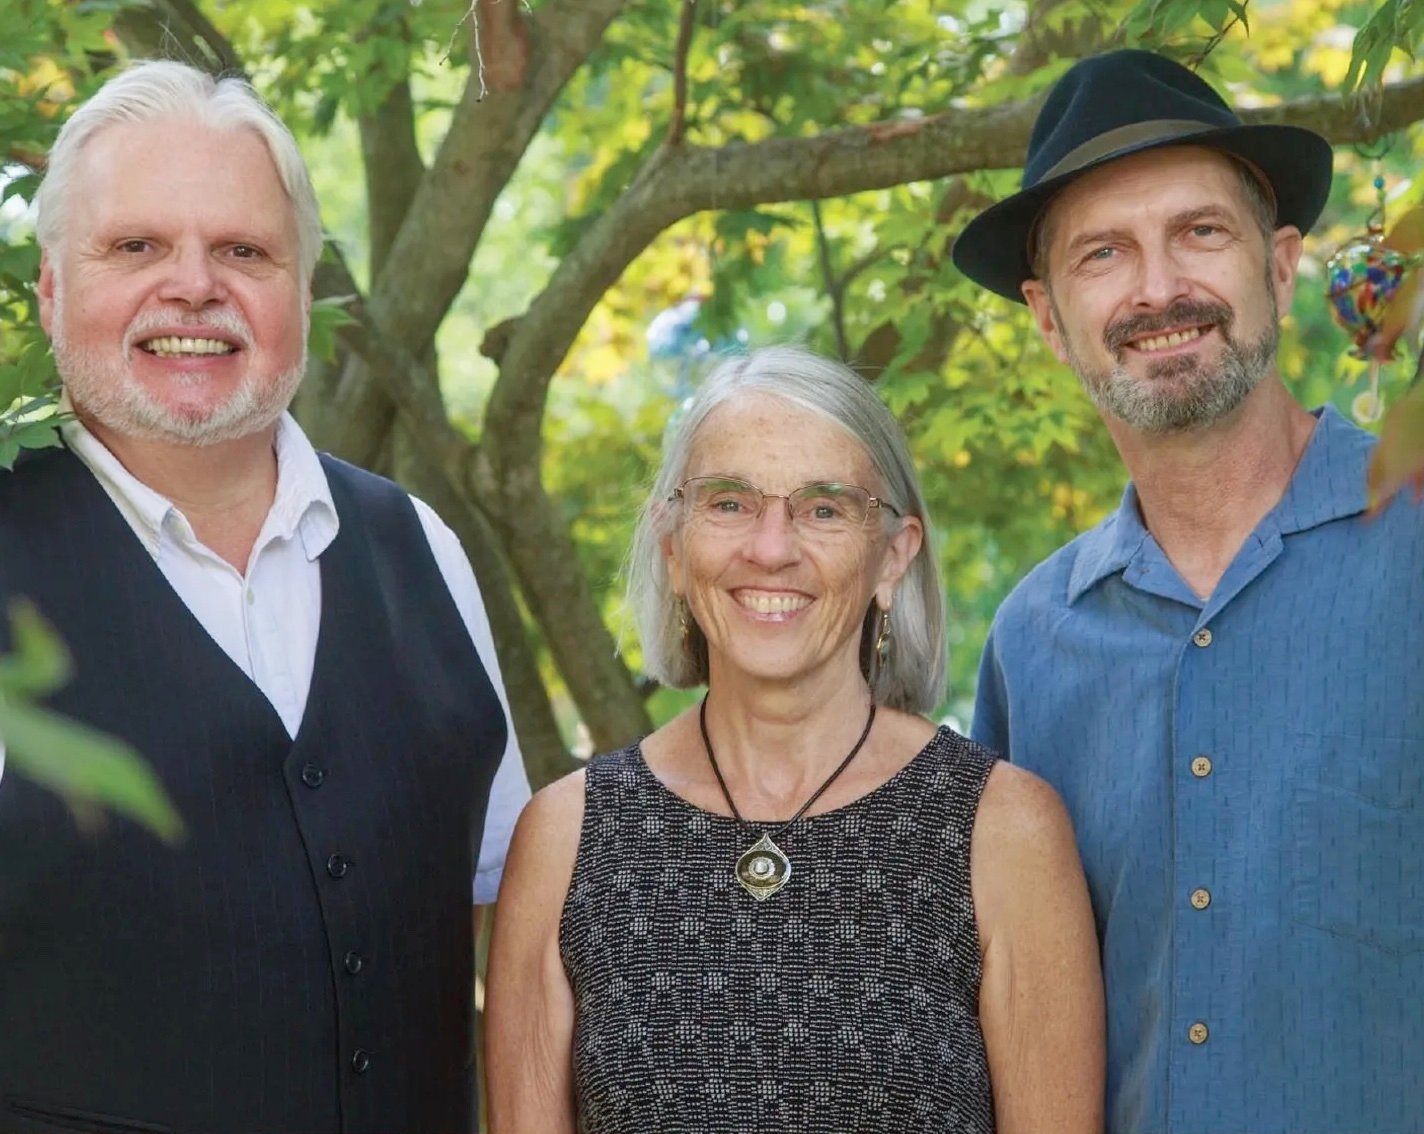 The Kirkland Art Center will welcome the Maria Gillard Trio to their KAC Live concert series on Saturday, October 22 at 7:30 pm.